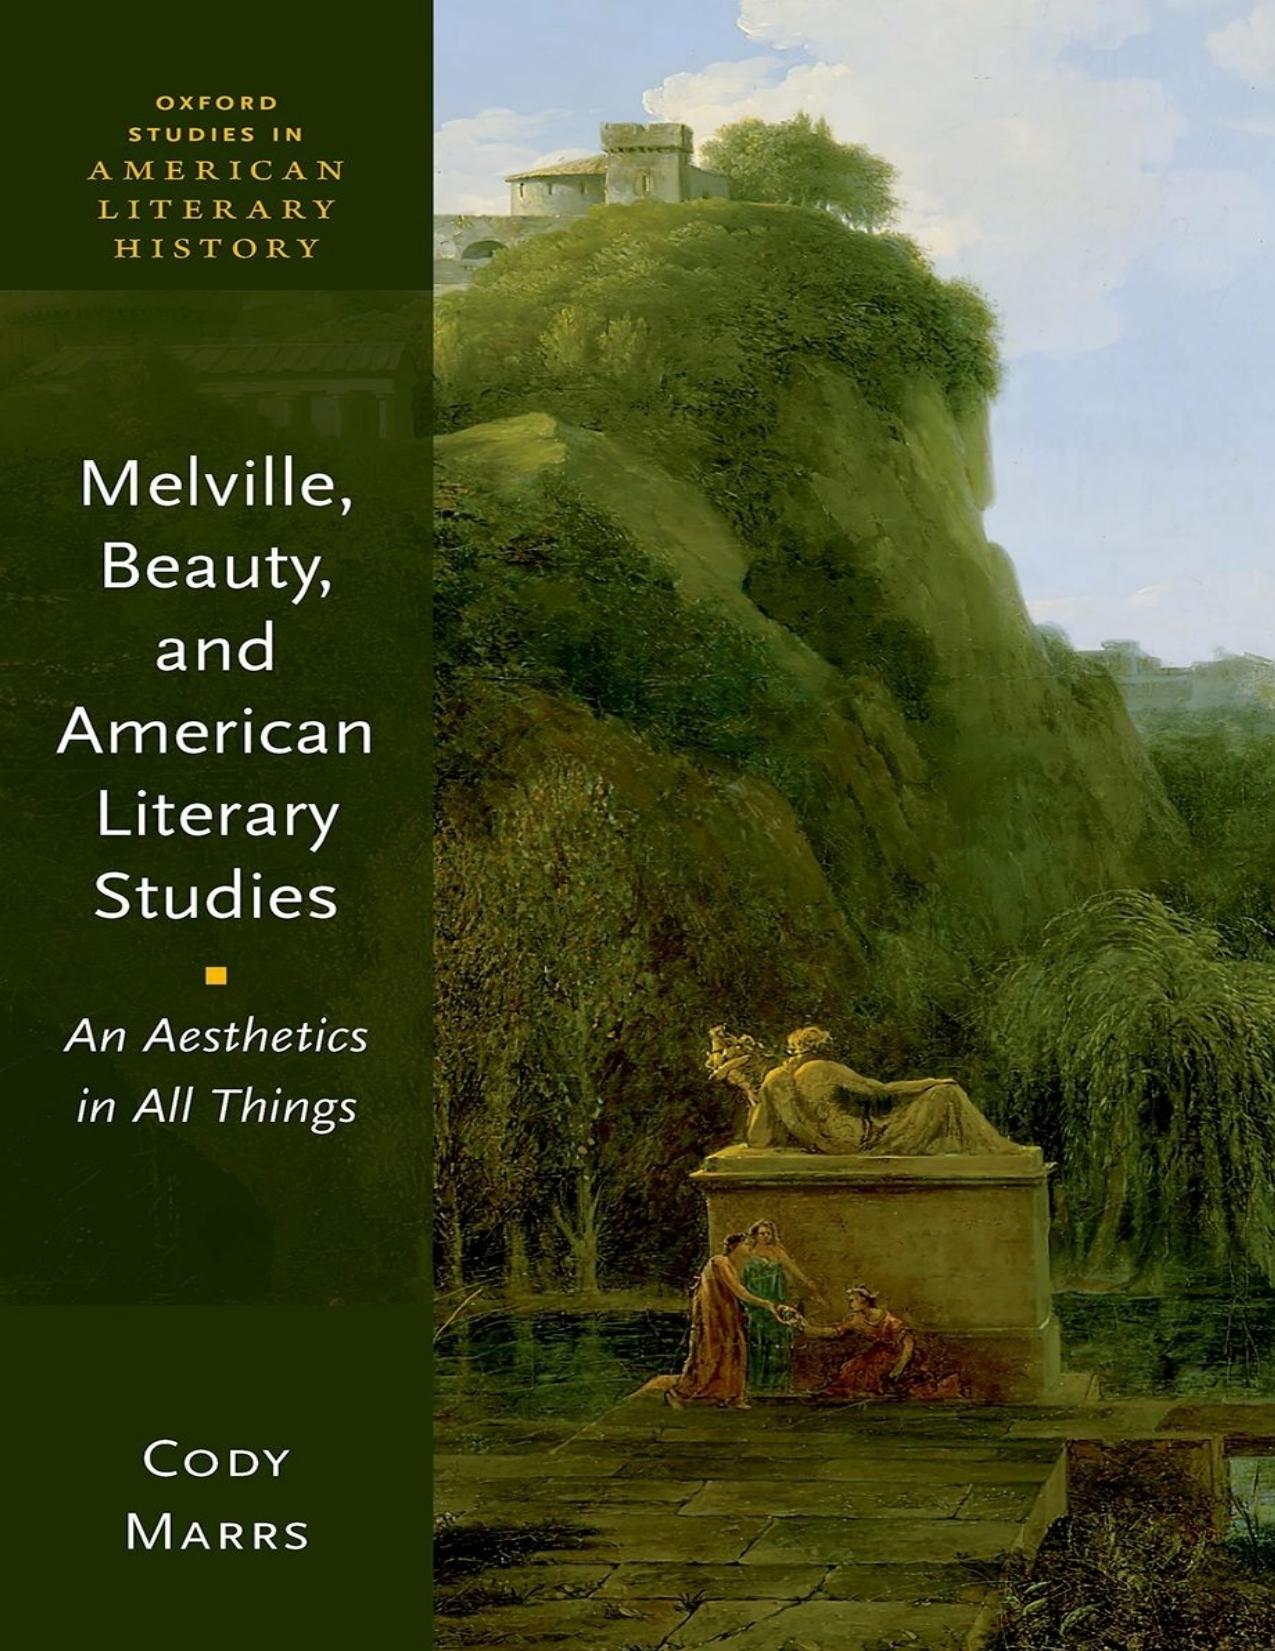 Melville, Beauty, and American Literary Studies by Cody Marrs